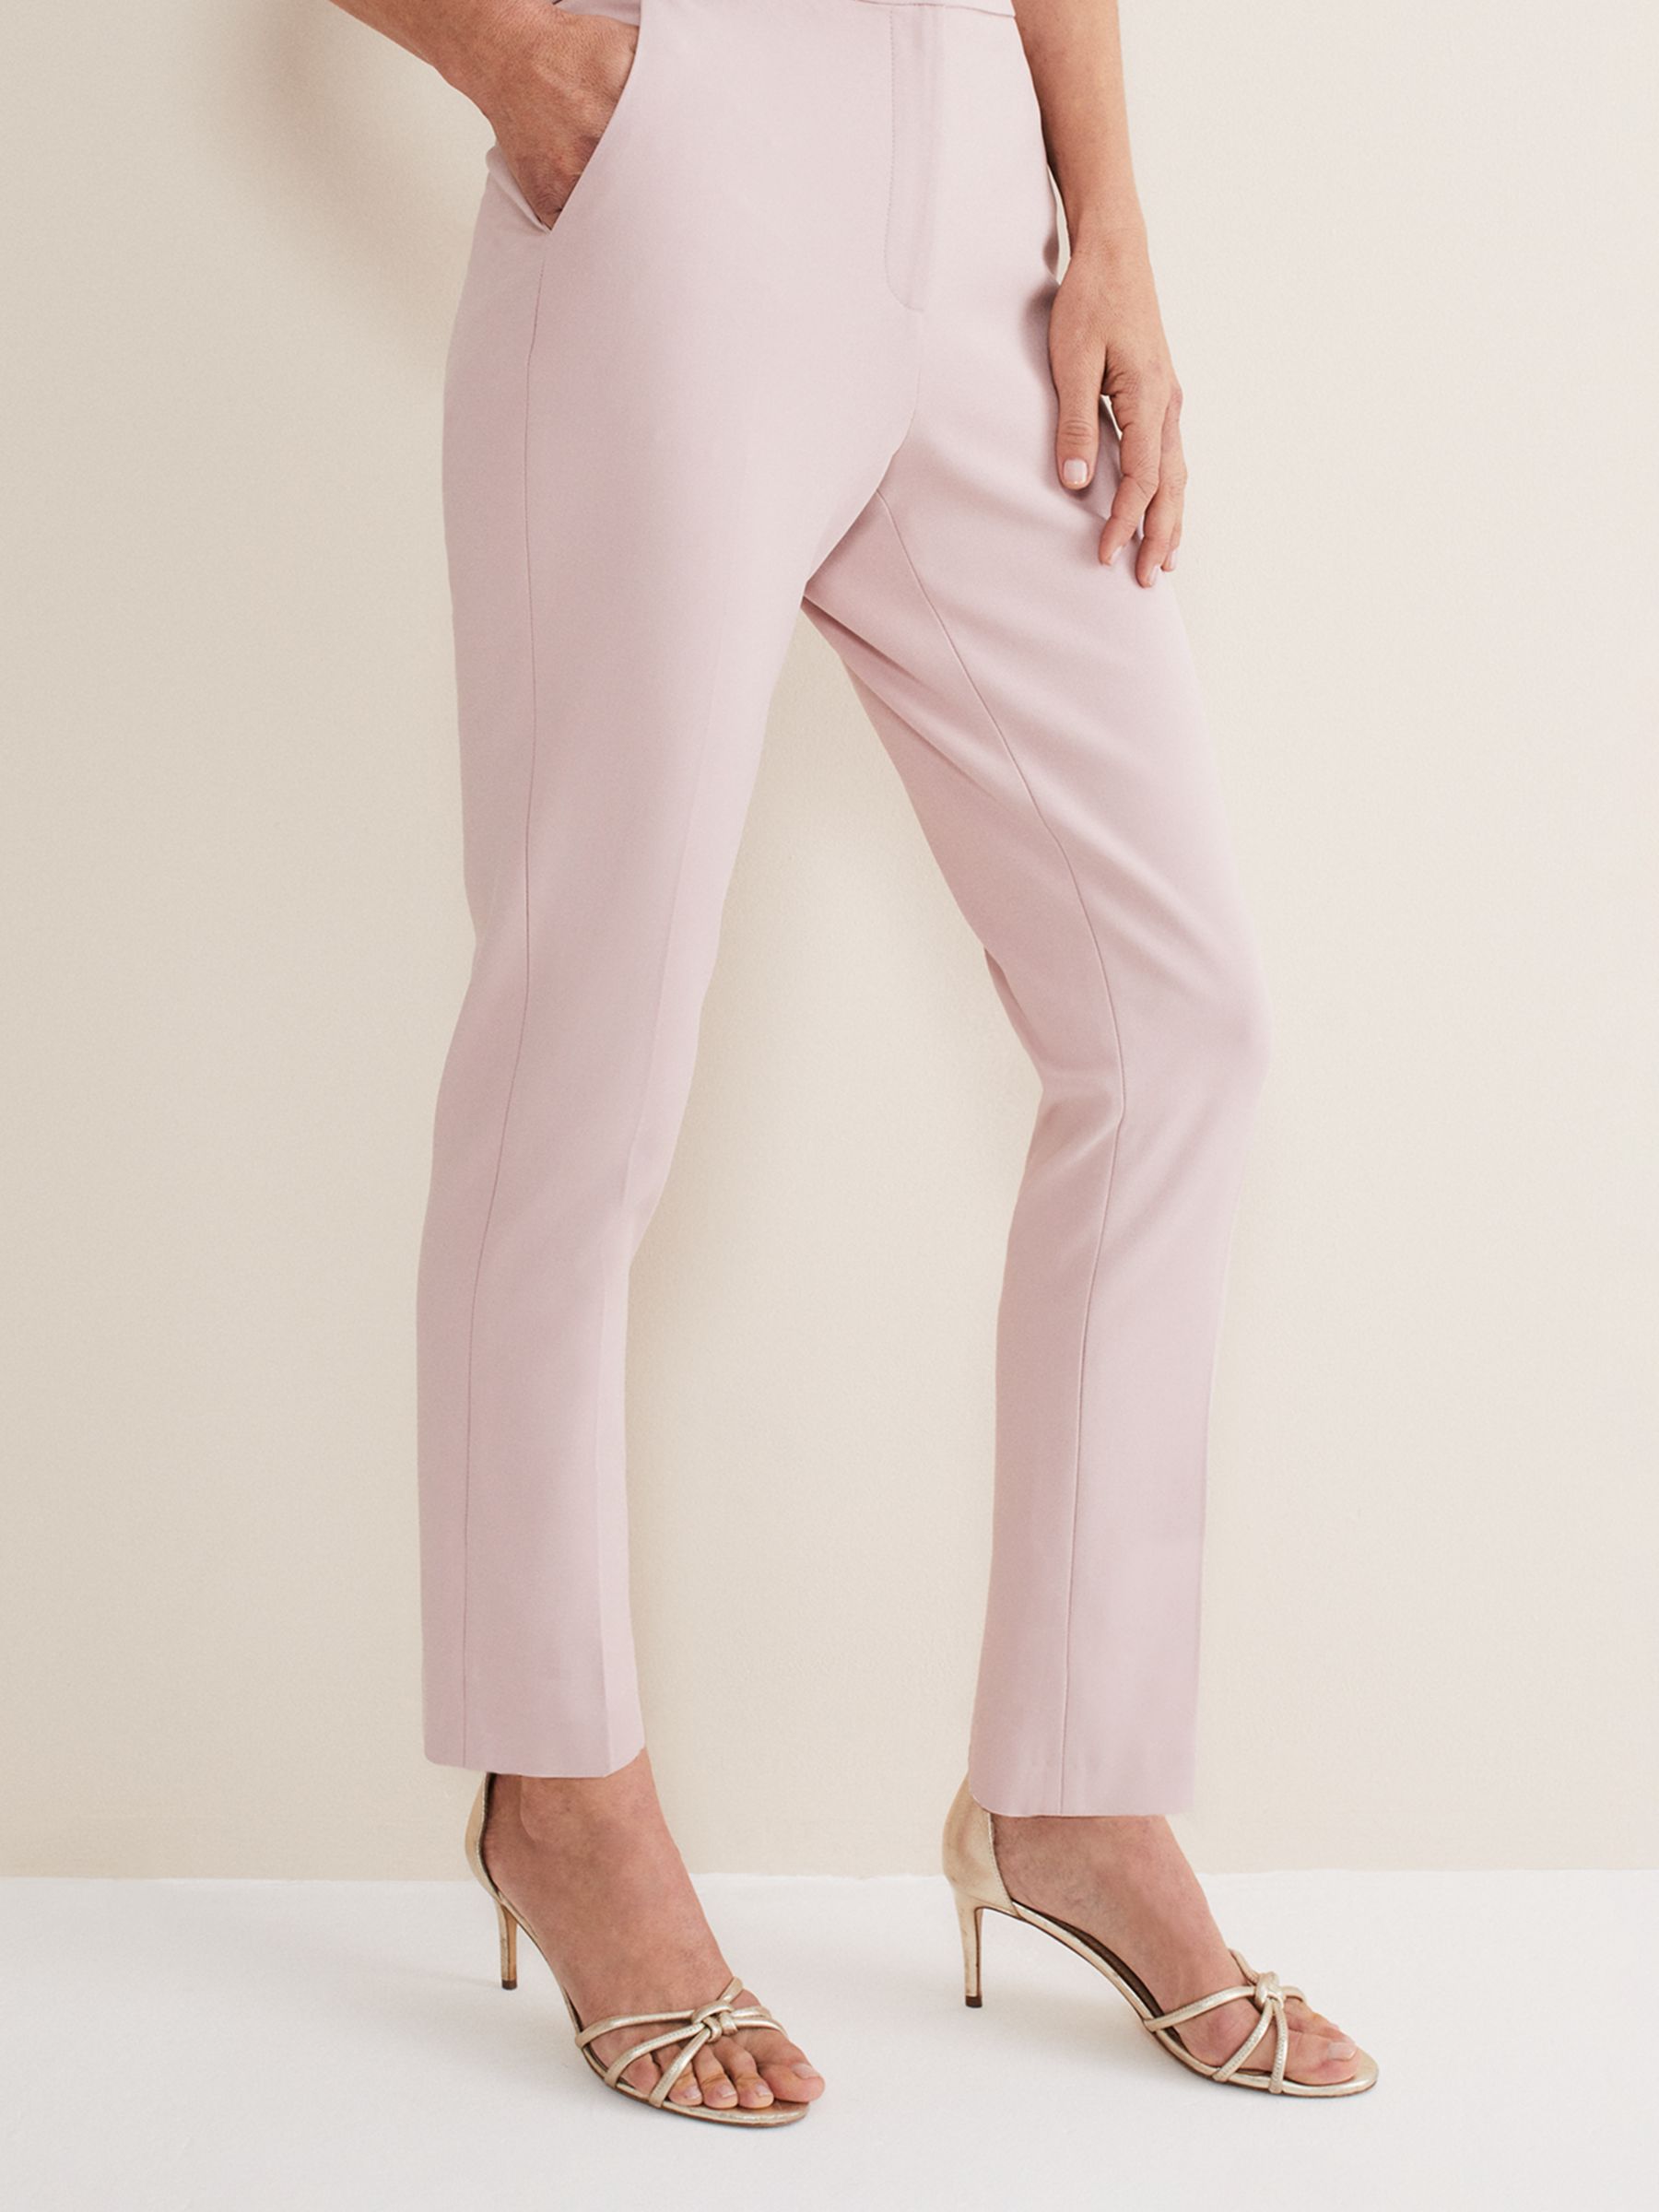 Phase Eight Eira Cigarette Trousers, Pale Pink at John Lewis & Partners